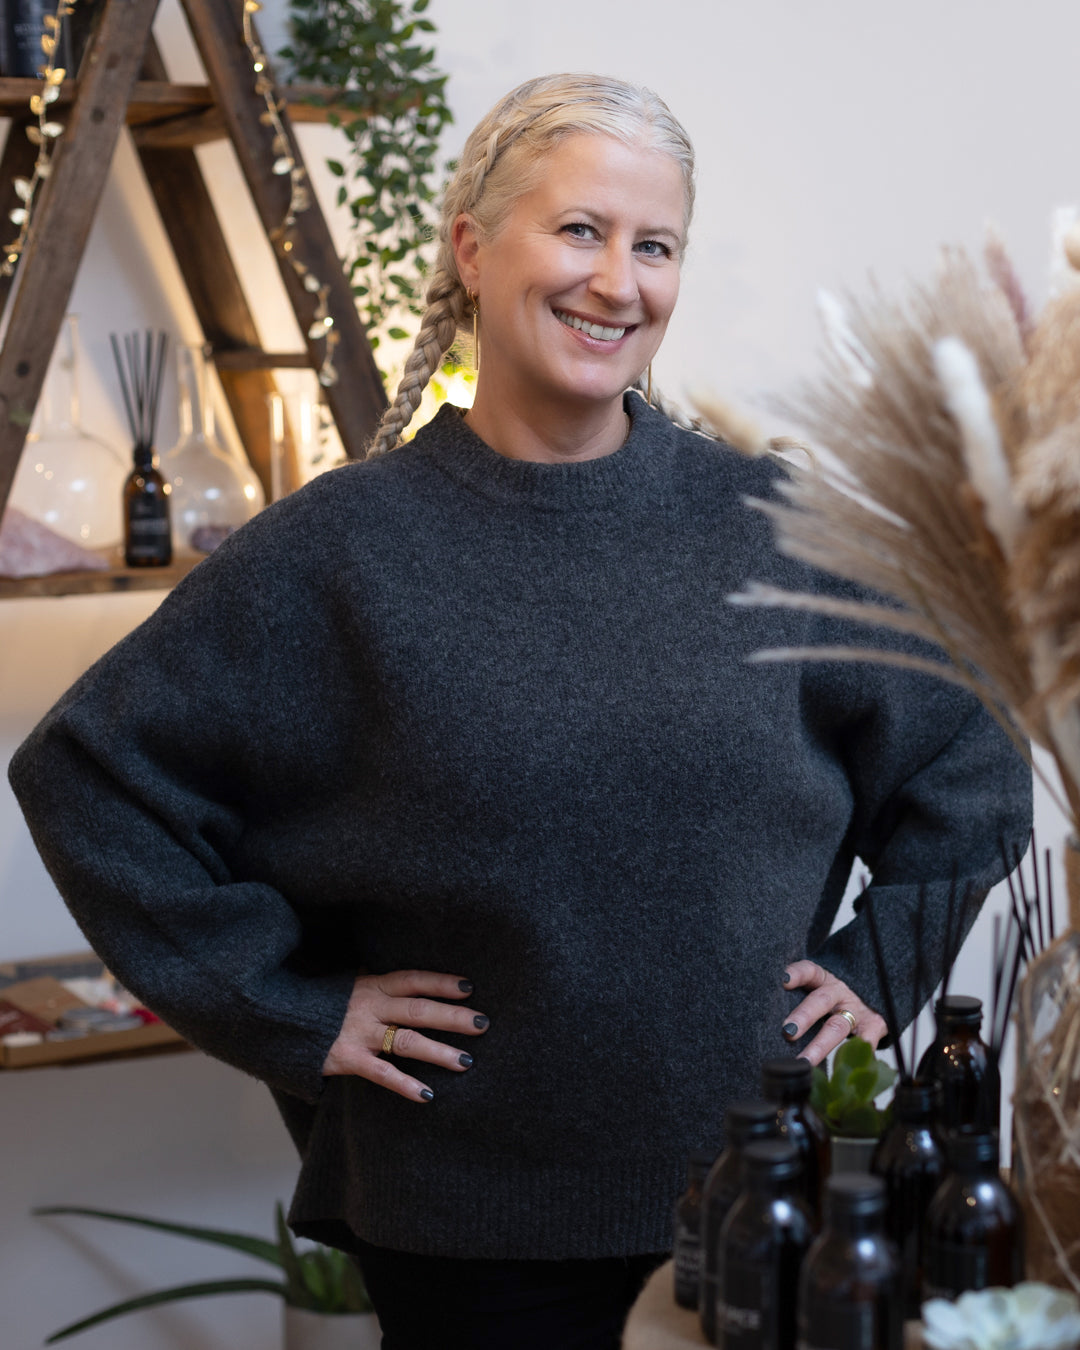 A woman with a warm smile stands in a cosy, naturally lit room. Her hair is styled in elegant, tight braids wrapped around her head, highlighting her silver strands. She's wearing a comfortable, oversized charcoal sweater and black trousers, with her hands placed confidently on her hips. In the background, there's an assortment of stylish decor including pampas grass, delicate string lights, glass vases, and an array of dark bottles, possibly containing artisanal products, which create an inviting and tranquil atmosphere